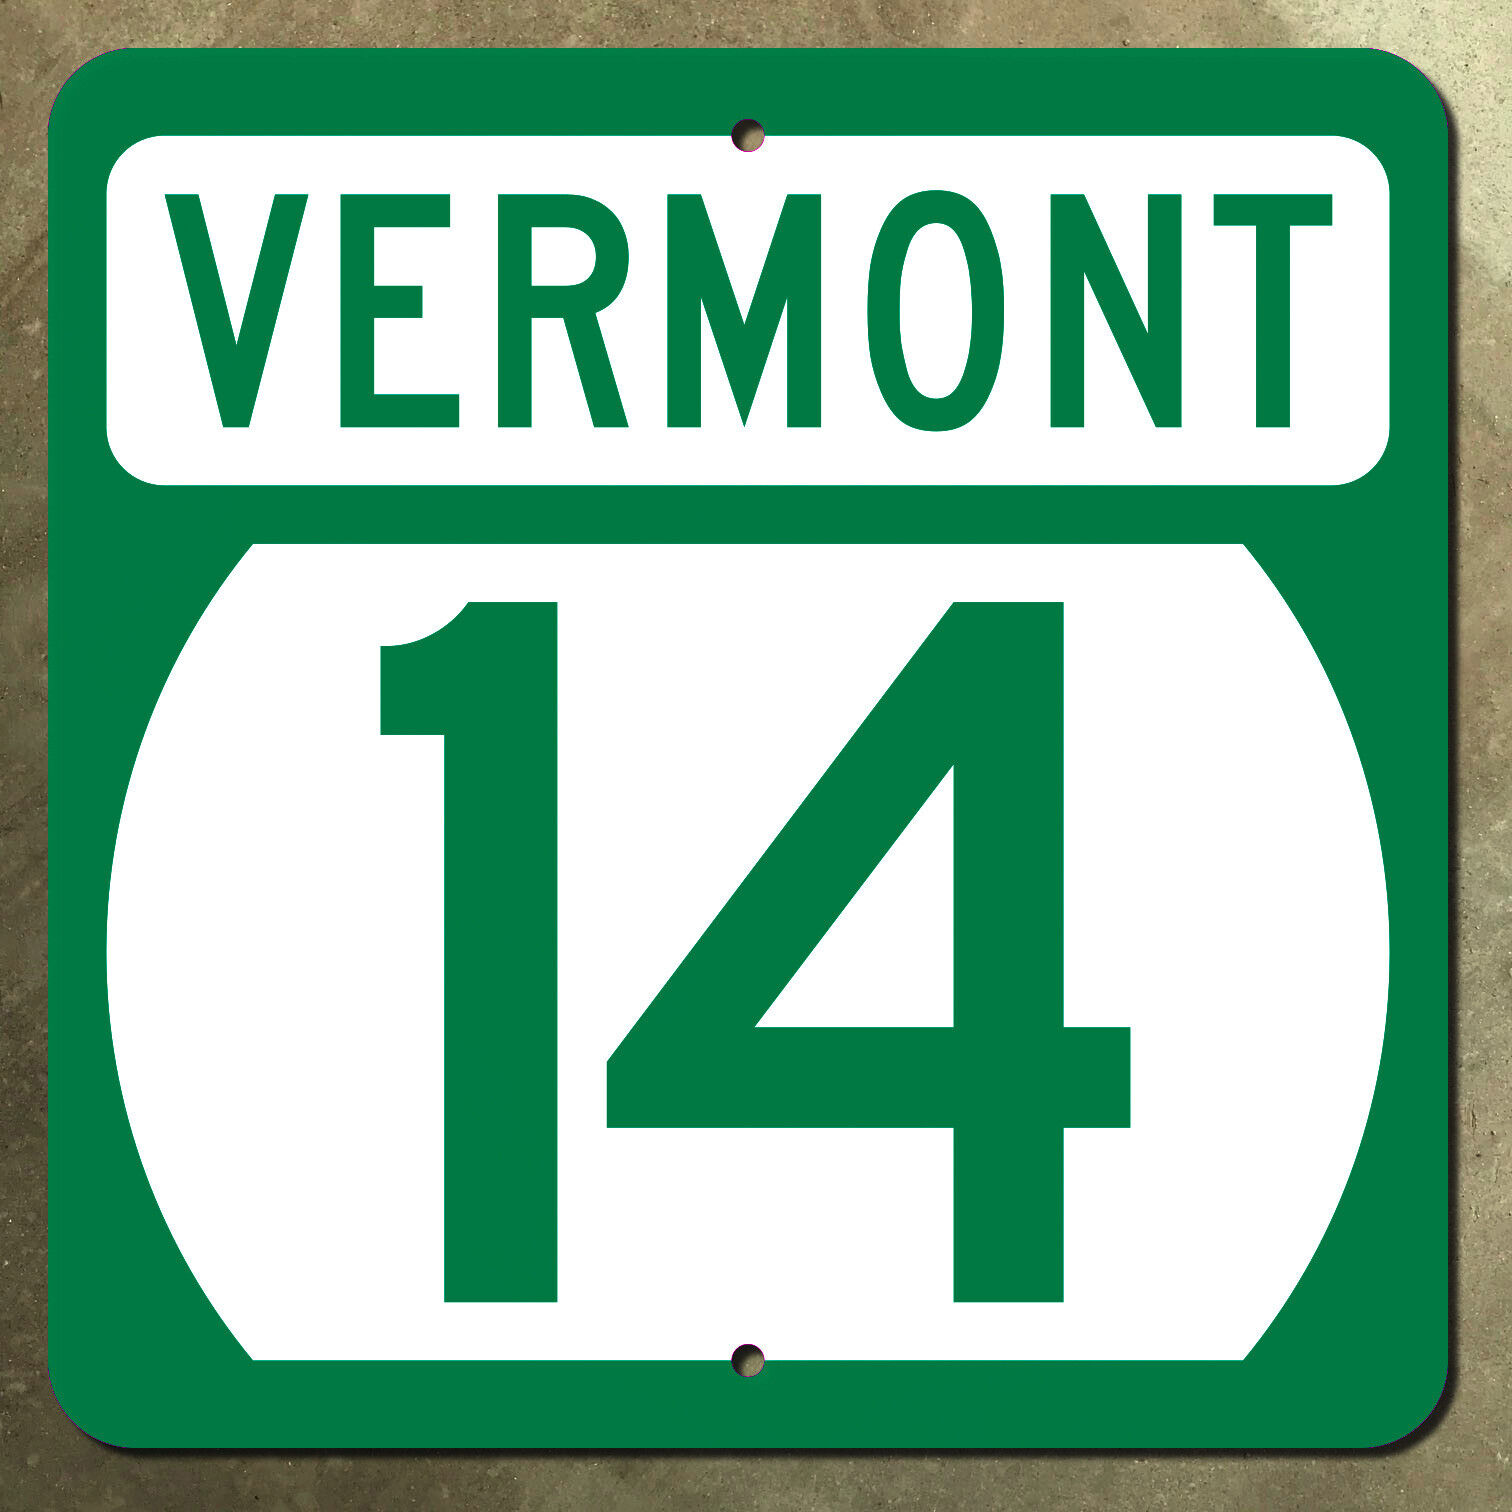 Vermont route 14 Barre highway marker road sign shield 1993 scenic green 16x16